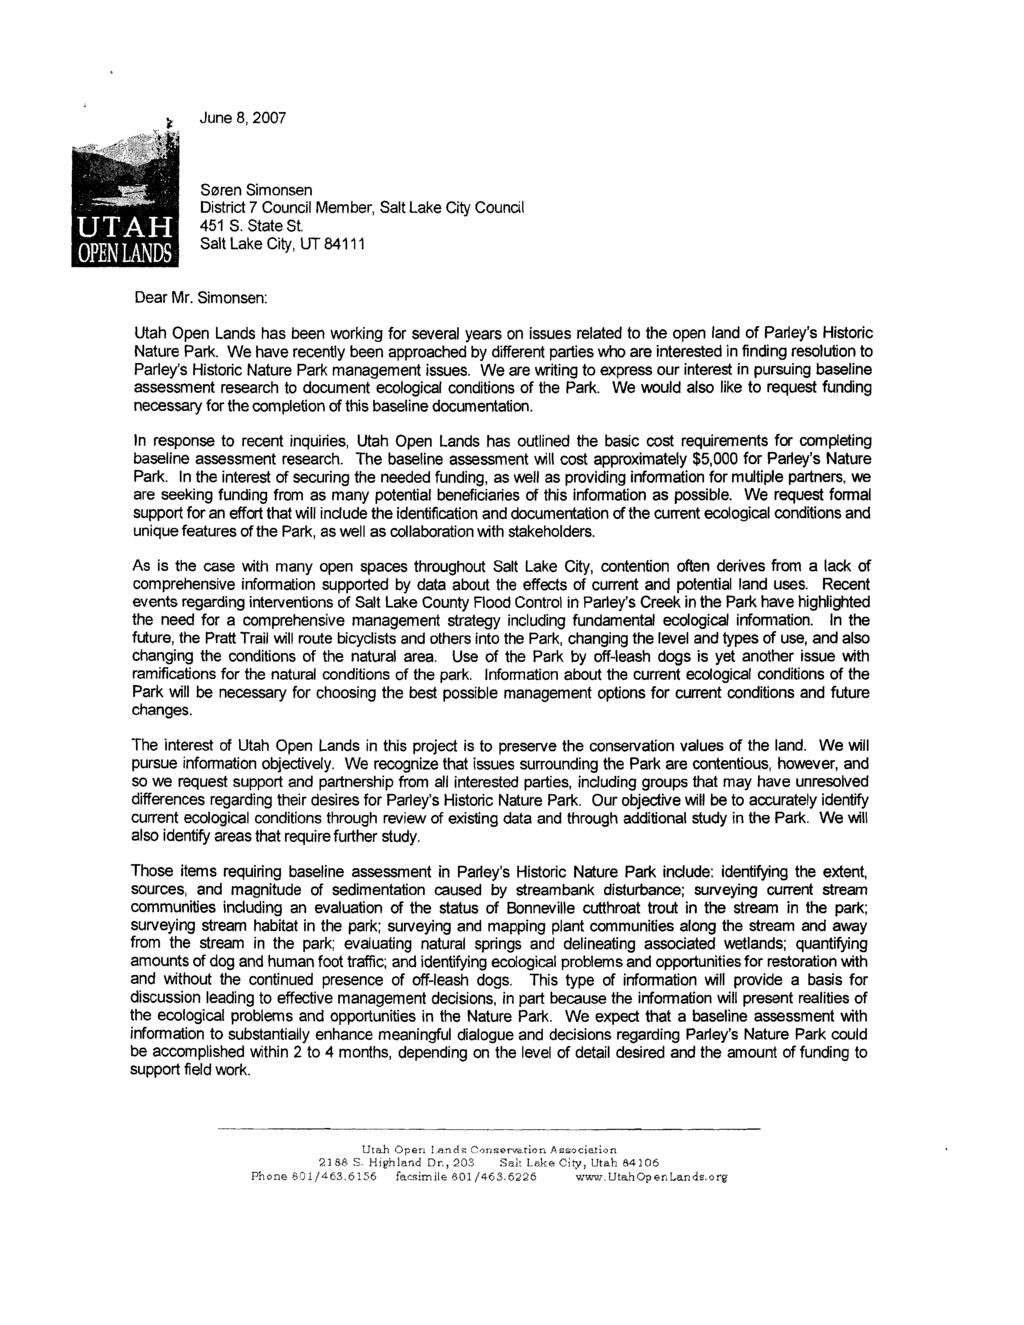 June 8,2007 Dear Mr. Simonsen: Utah Open Lands has been working for several years on issues related to the open land of Parley's Historic Nature Park.